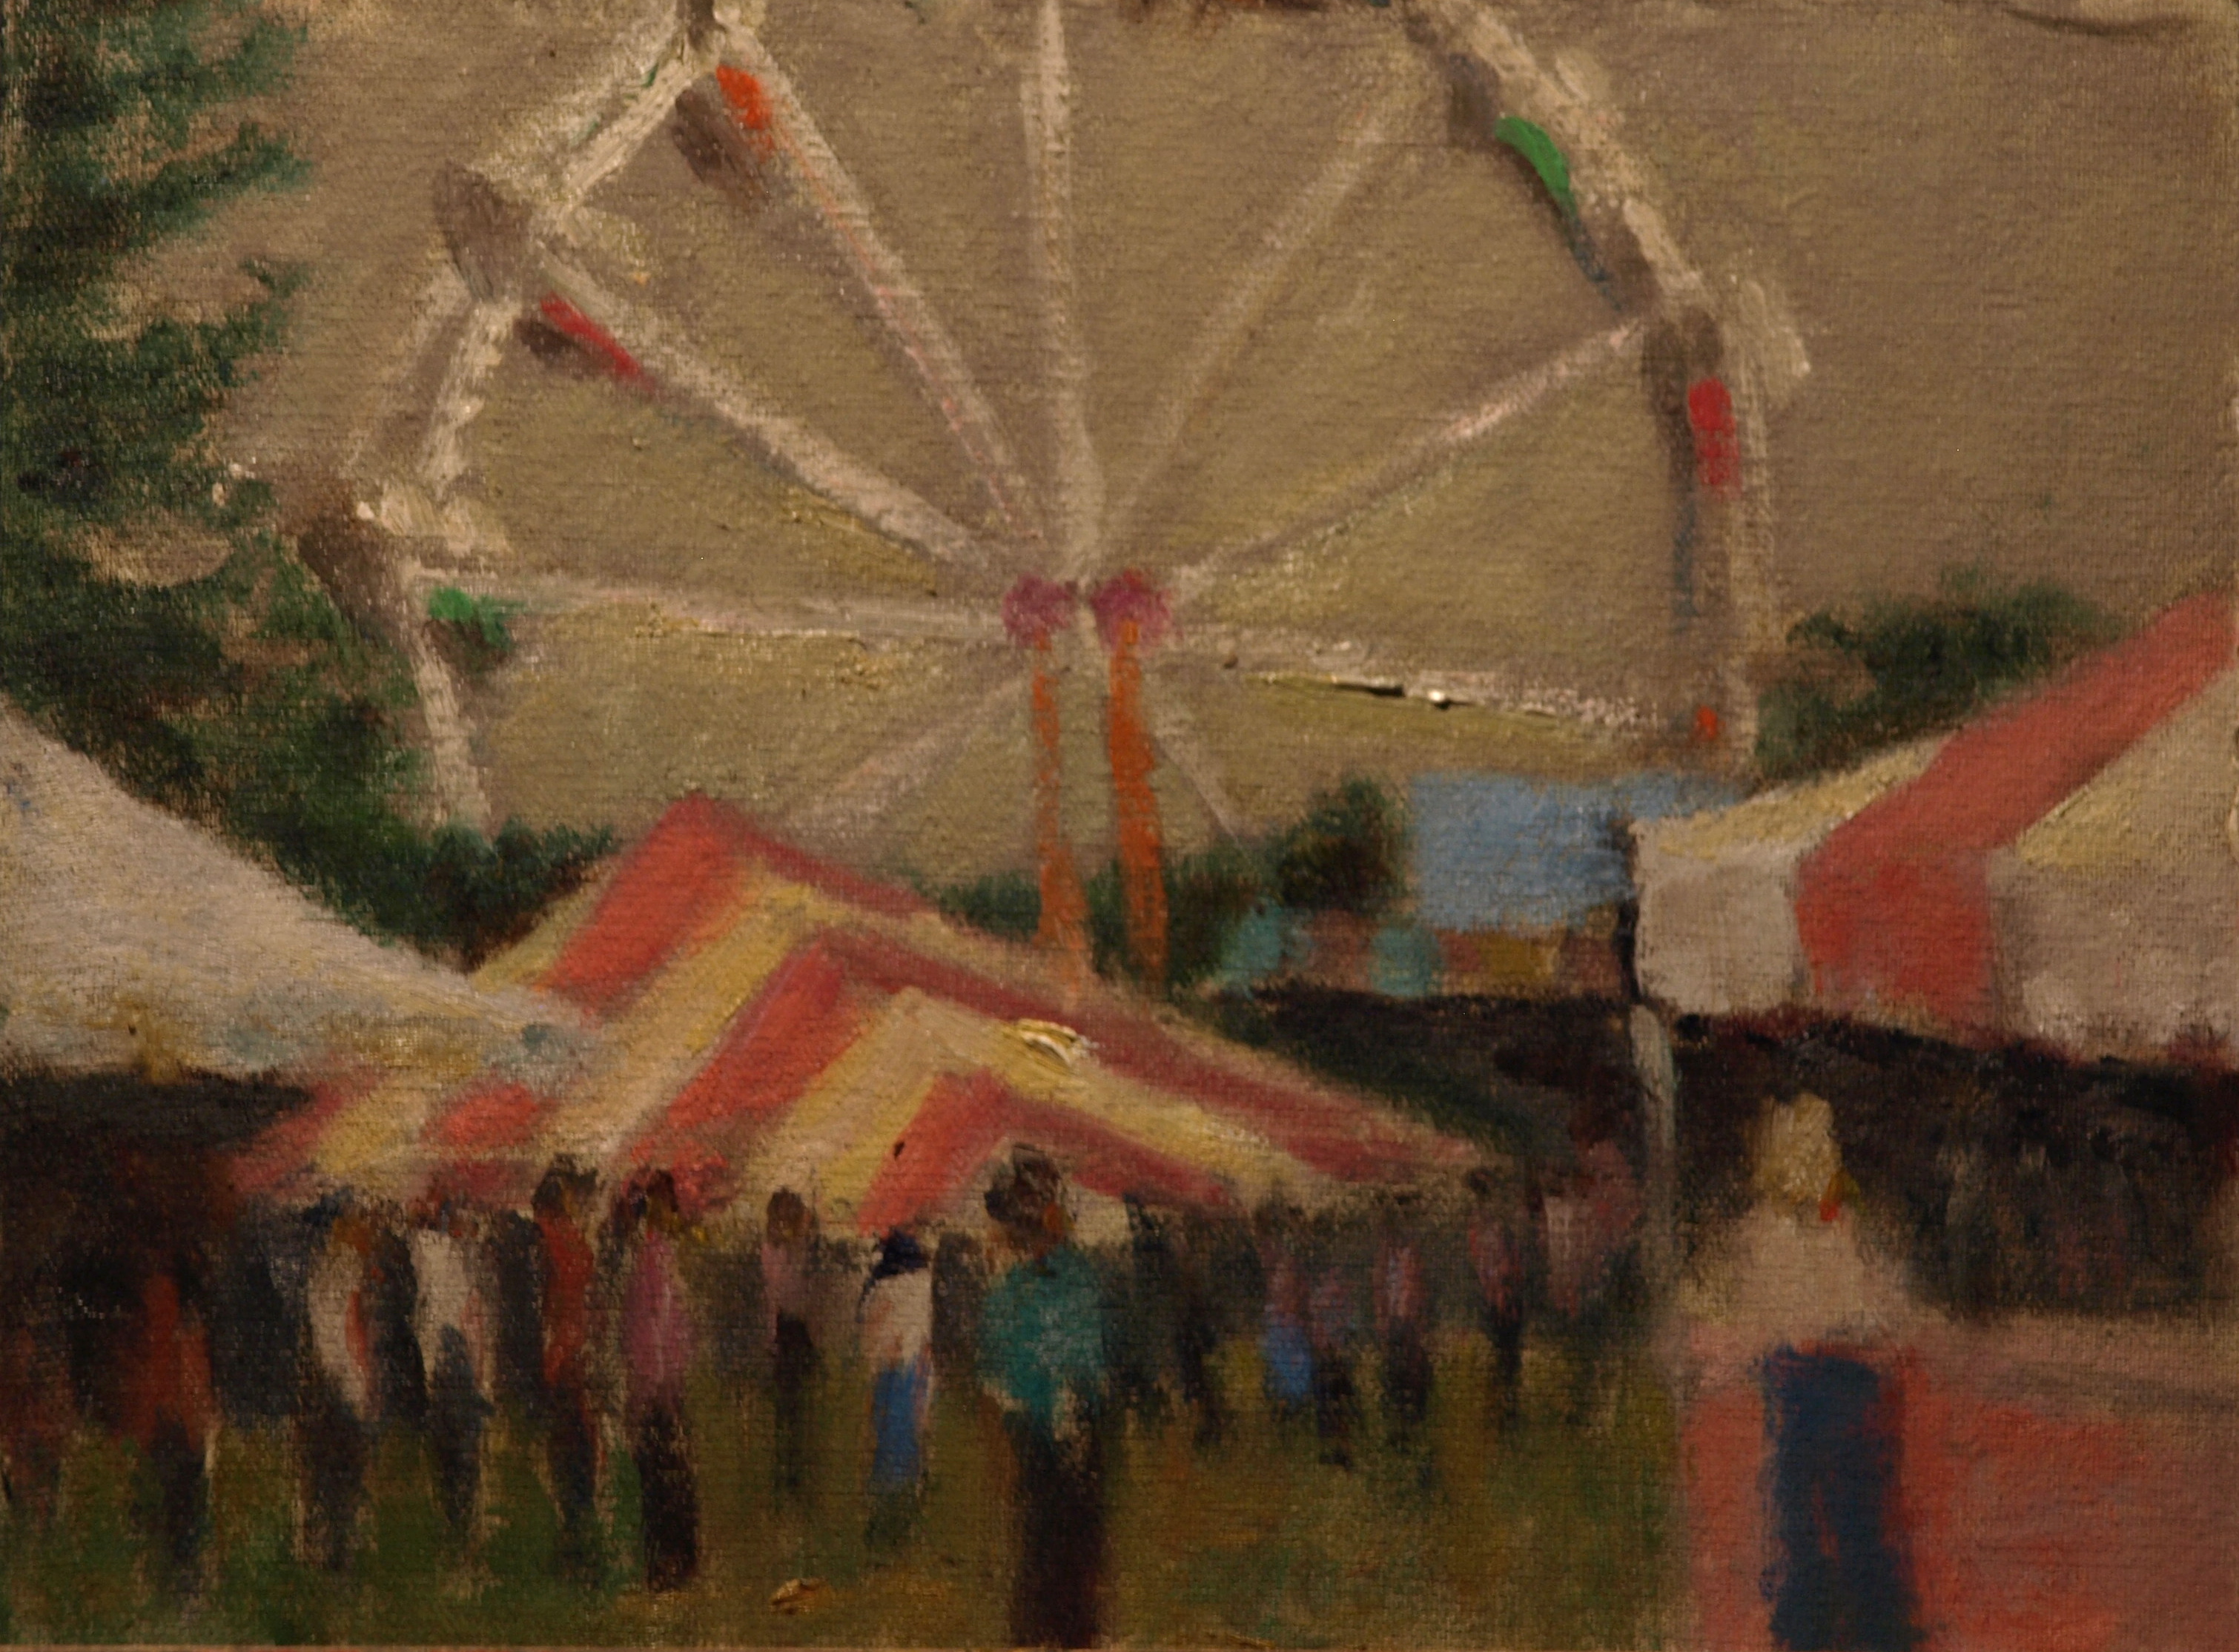 Ferris Wheel, Oil on Canvas on Panel, 9 x 12 Inches, by Richard Stalter, $225